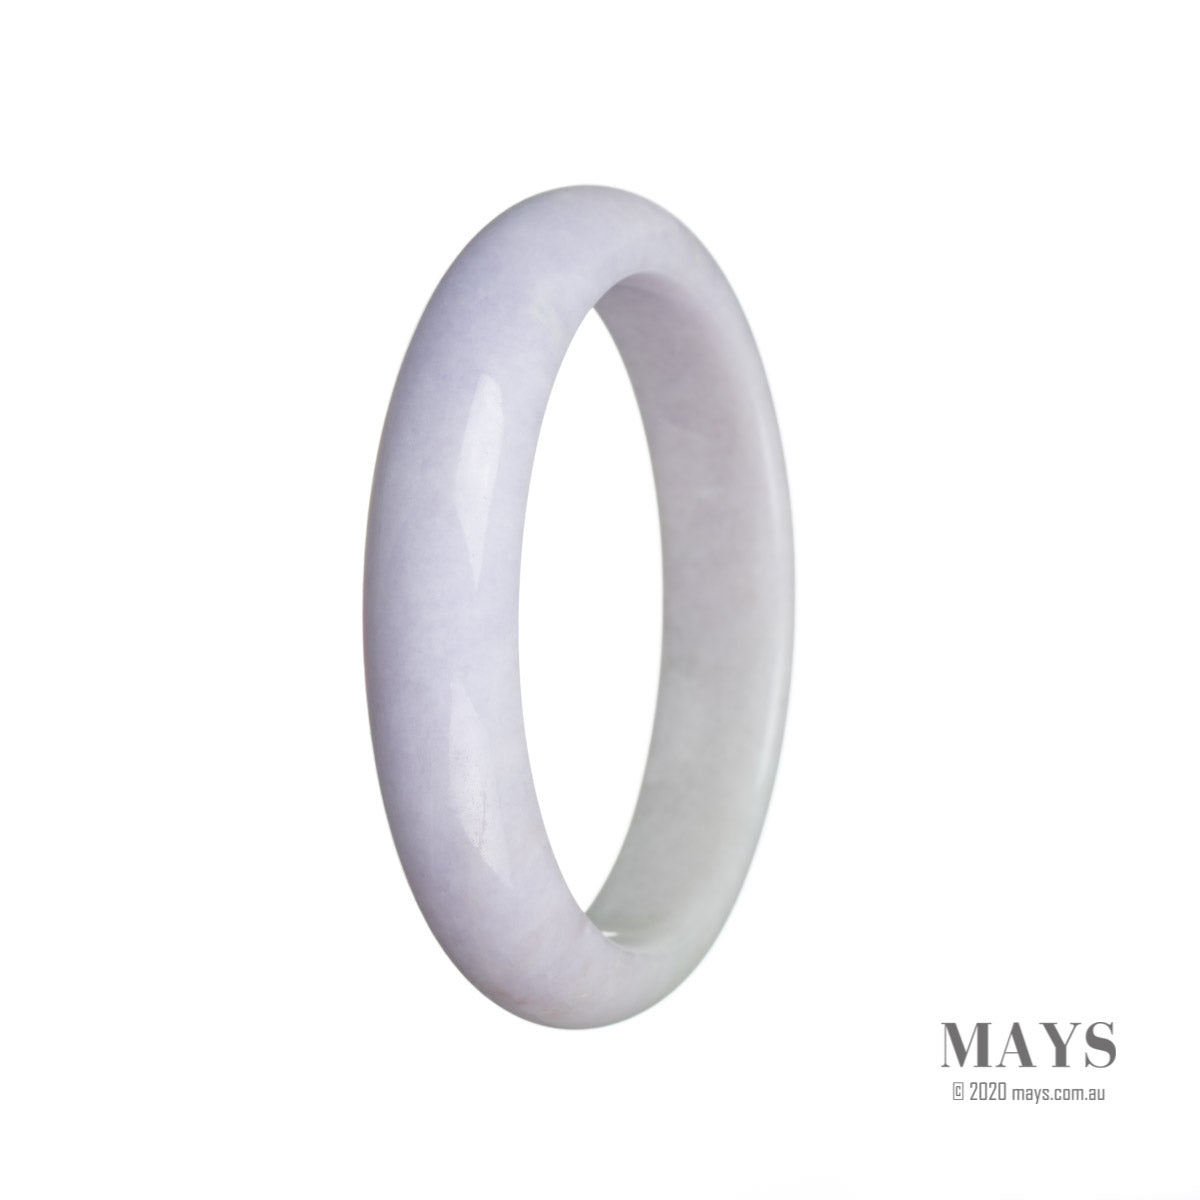 A lavender jadeite jade bangle bracelet with a semi-round shape, measuring 59mm in size.